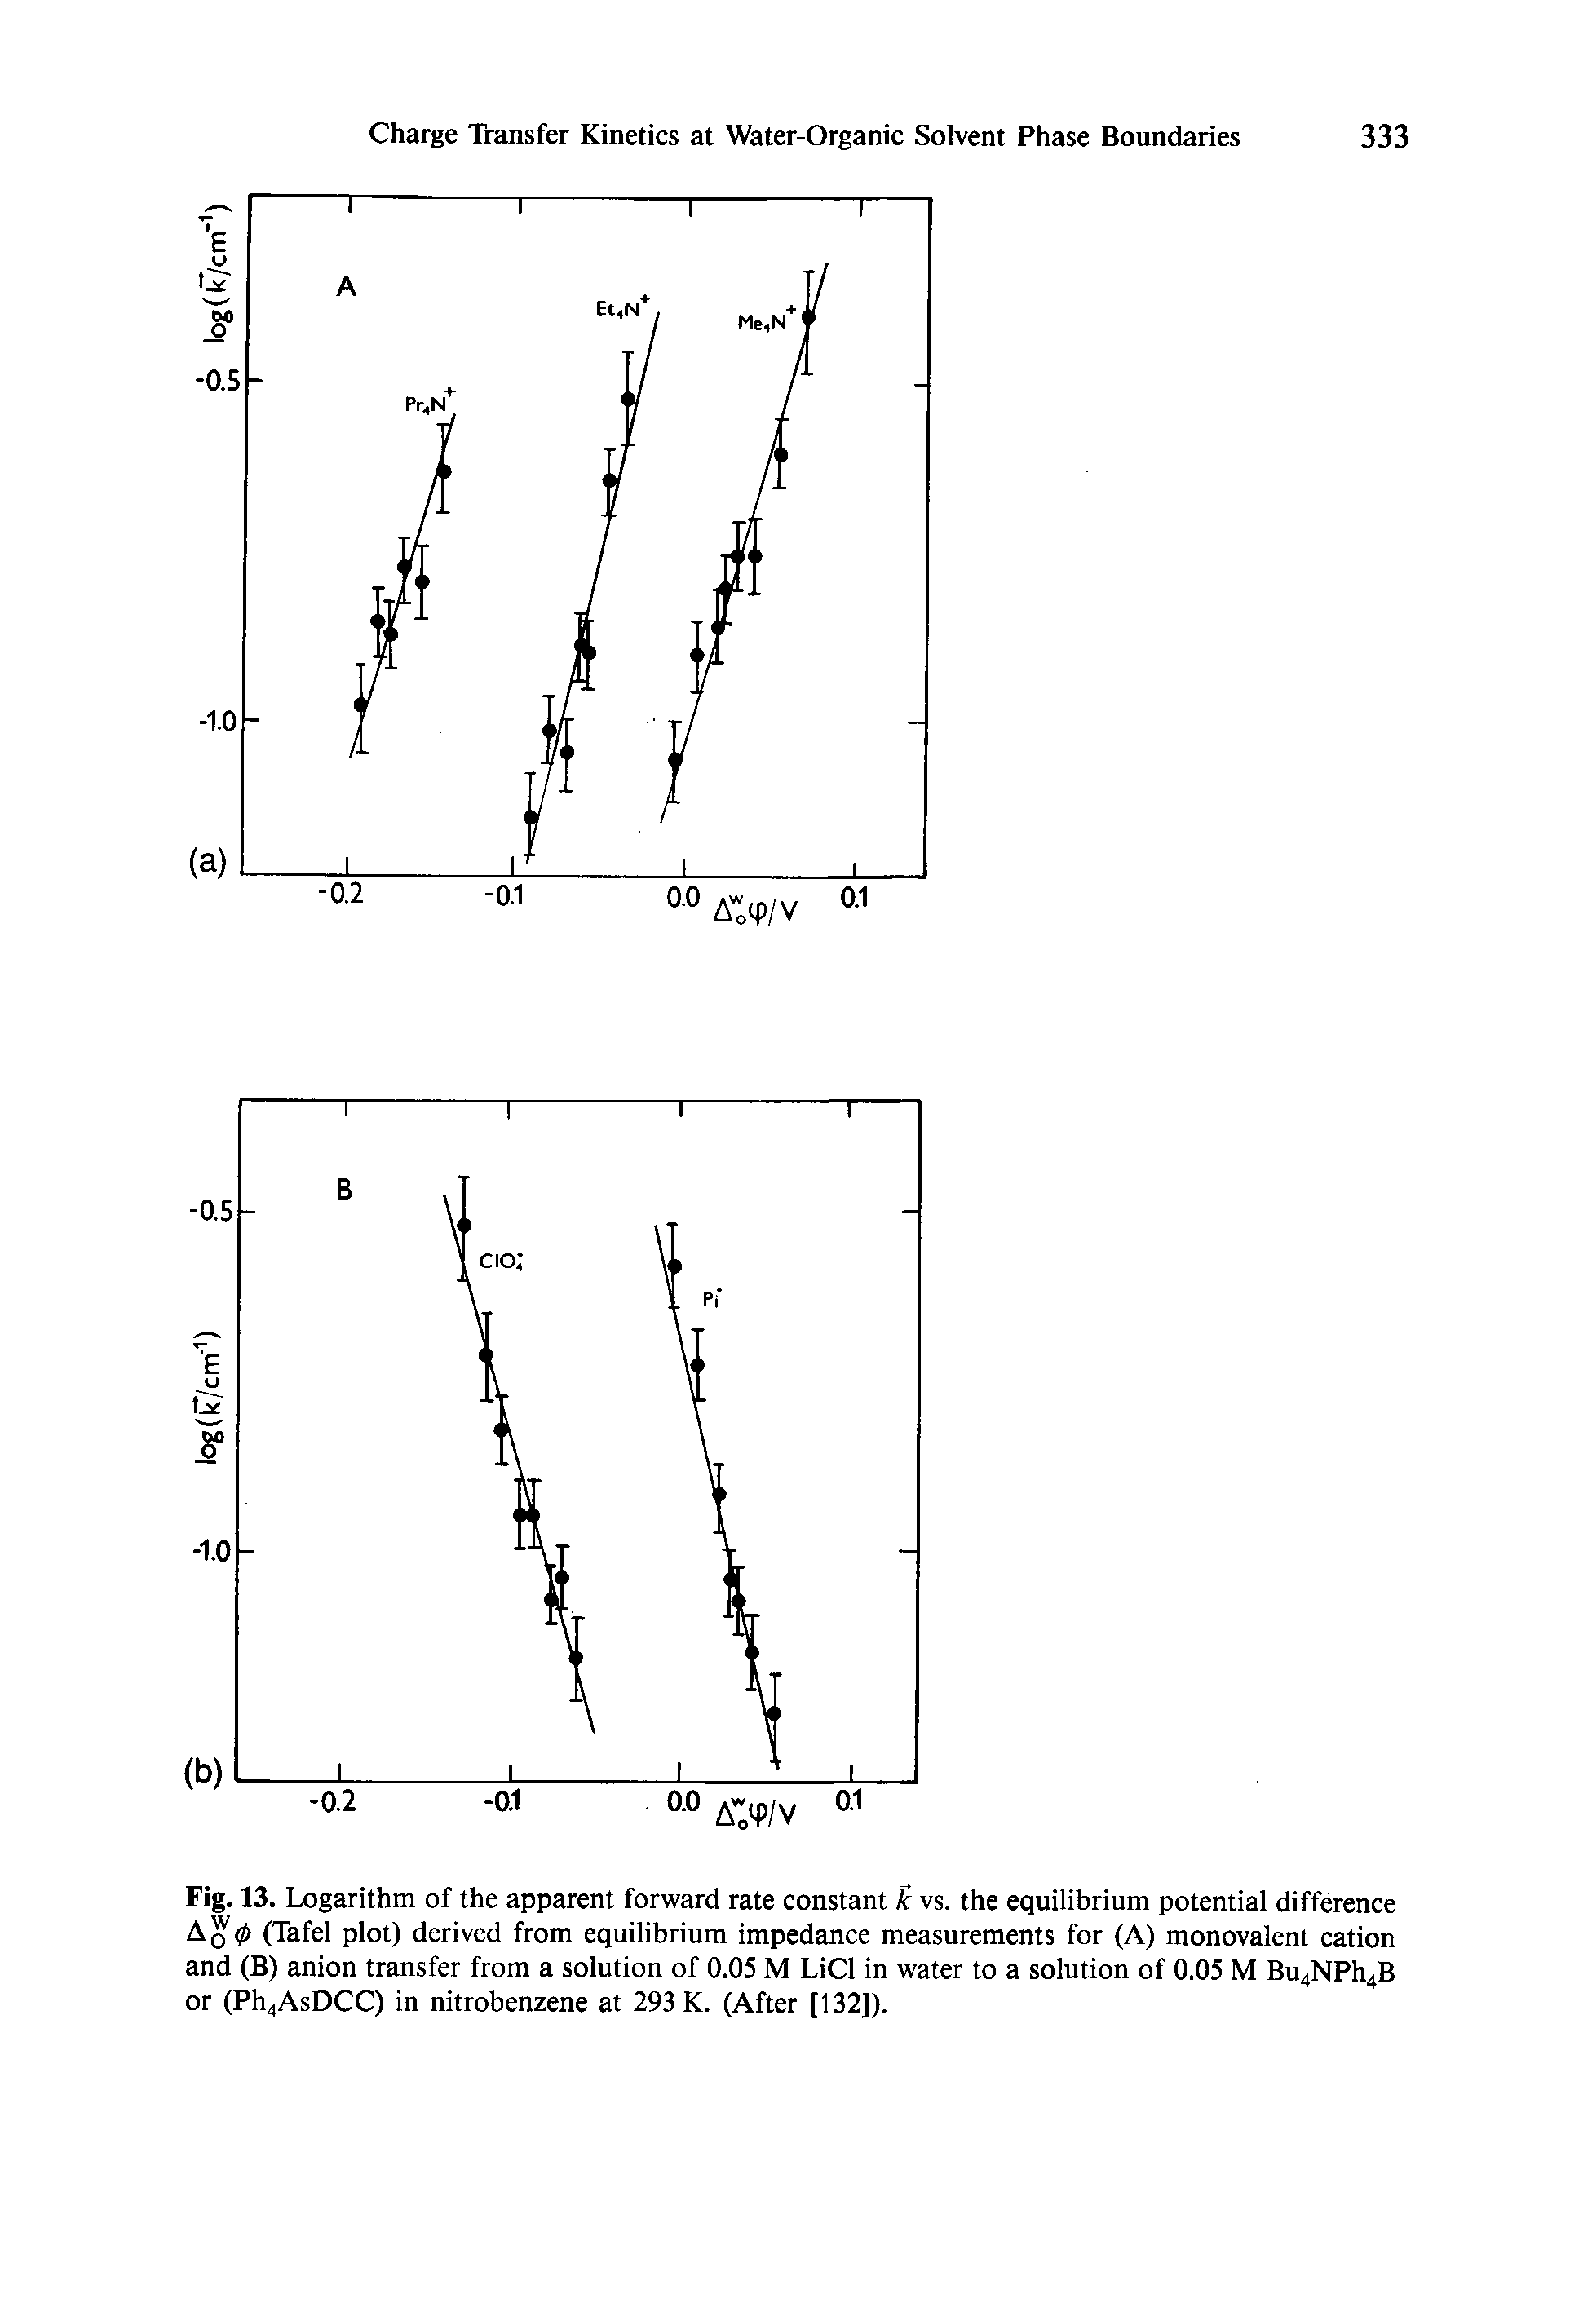 Fig. 13. Logarithm of the apparent forward rate constant k vs. the equilibrium potential difference A o 0 (Thfel plot) derived from equilibrium impedance measurements for (A) monovalent cation and (B) anion transfer from a solution of 0.05 M LiCl in water to a solution of 0.05 M Bu4NPh4B or (Ph4AsDCC) in nitrobenzene at 293 K. (After [132]).